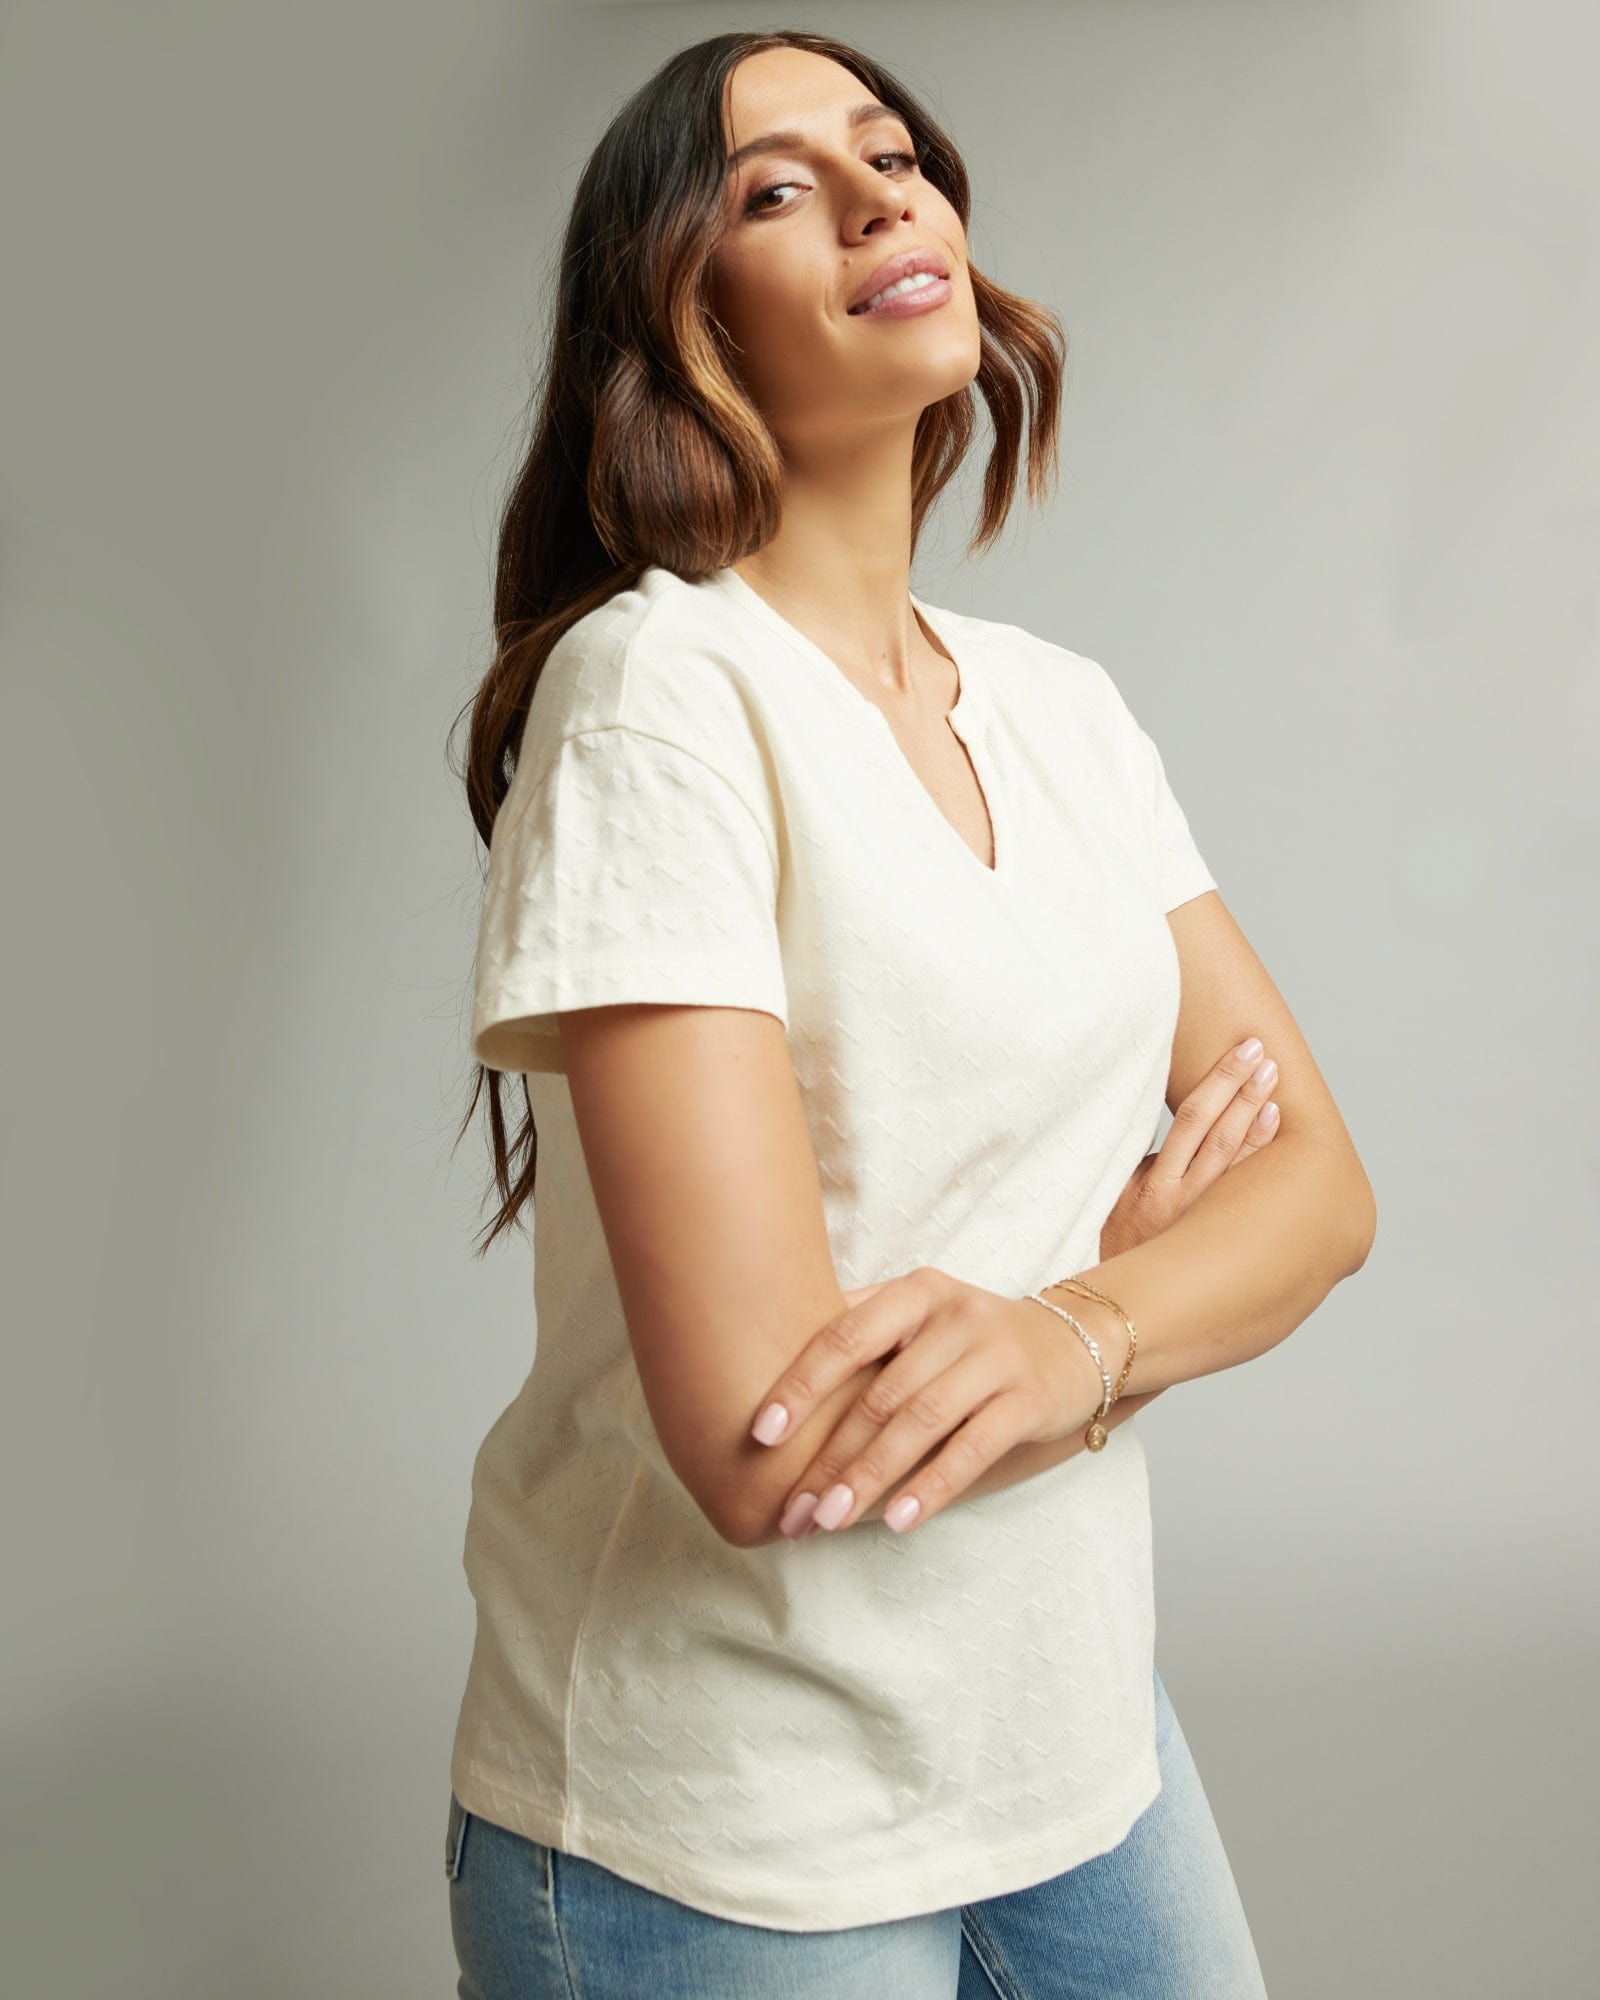 Woman in a shosrt sleeve, white tee